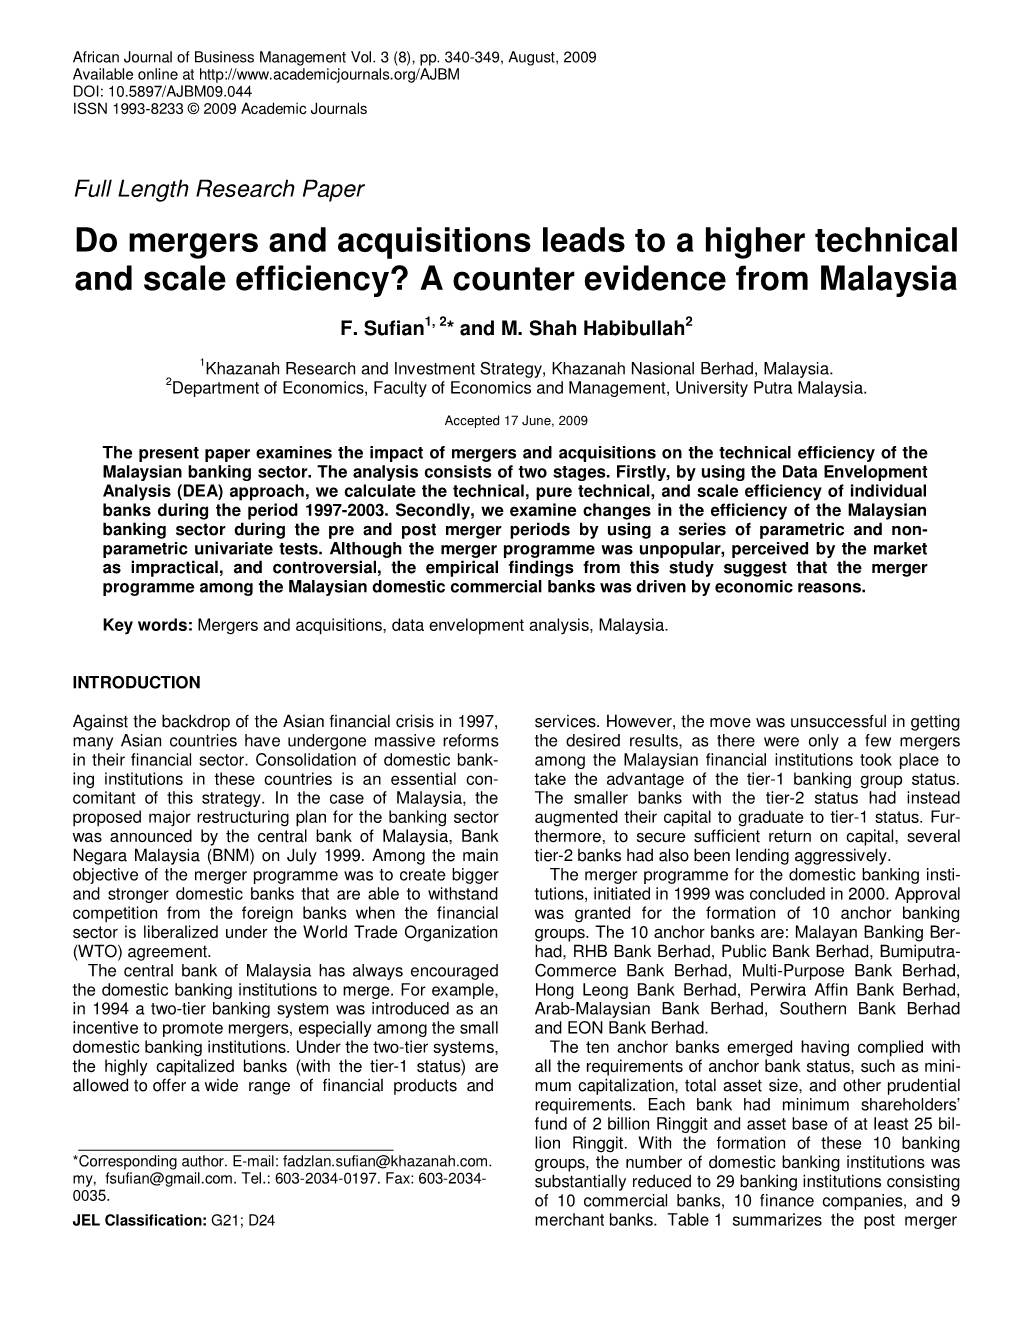 Do Mergers and Acquisitions Leads to a Higher Technical and Scale Efficiency? a Counter Evidence from Malaysia